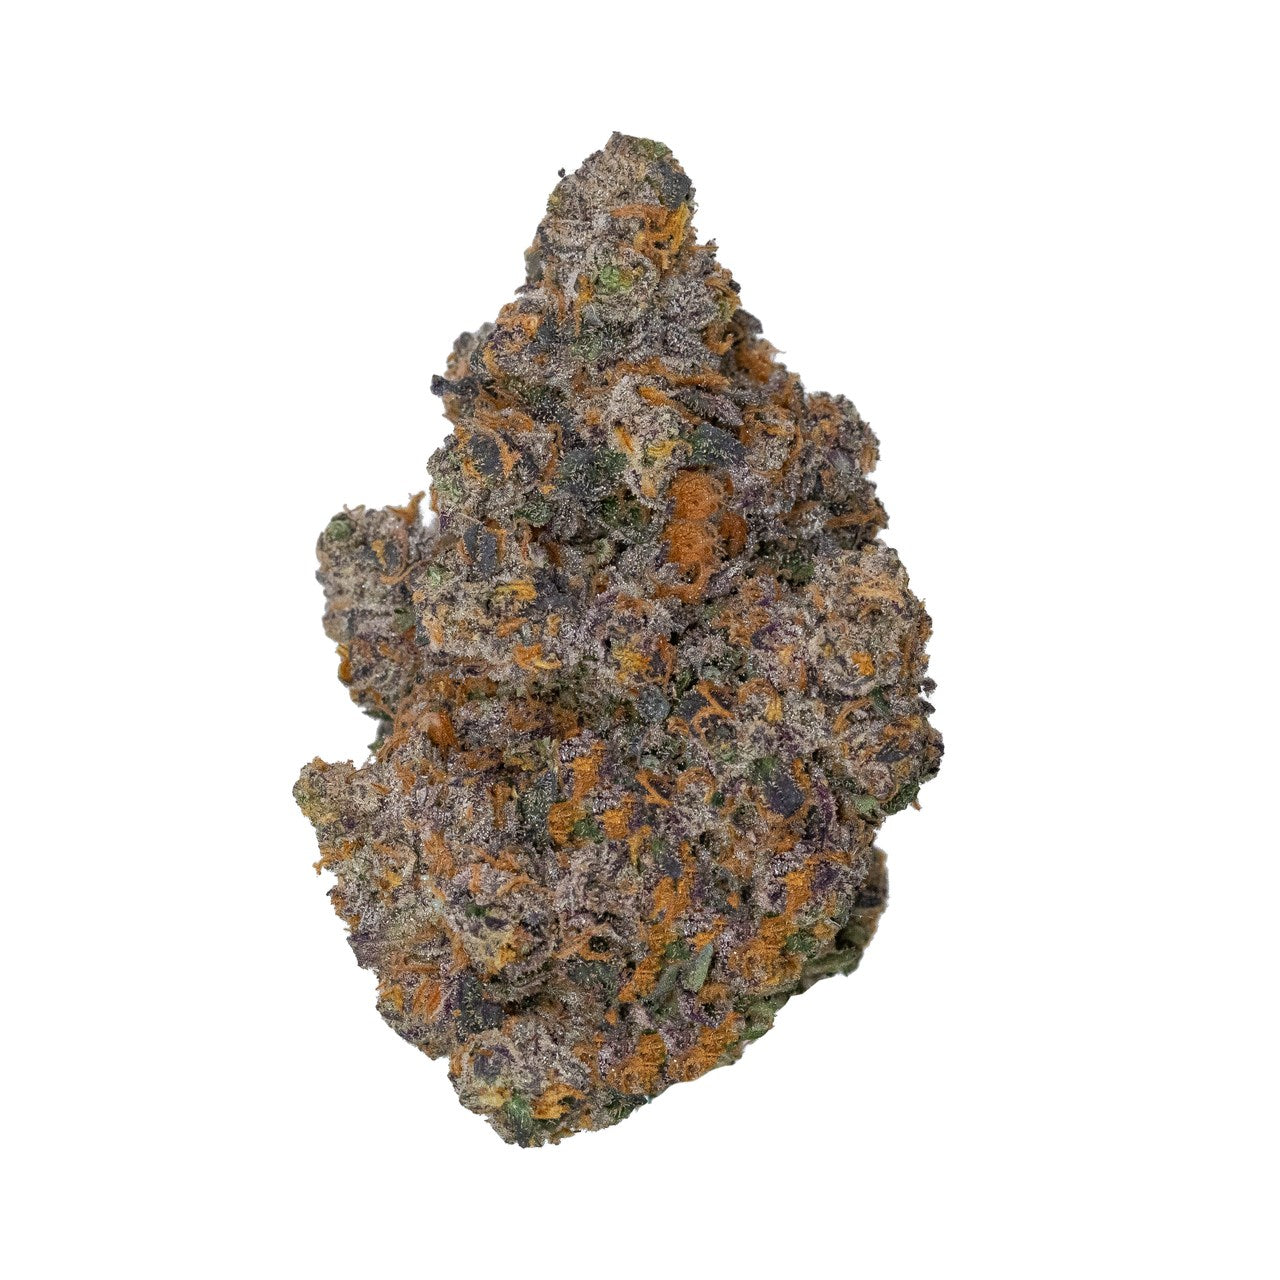 A nug of cannabis flower from the Wedding Cake weed strain sits in front of a white background.